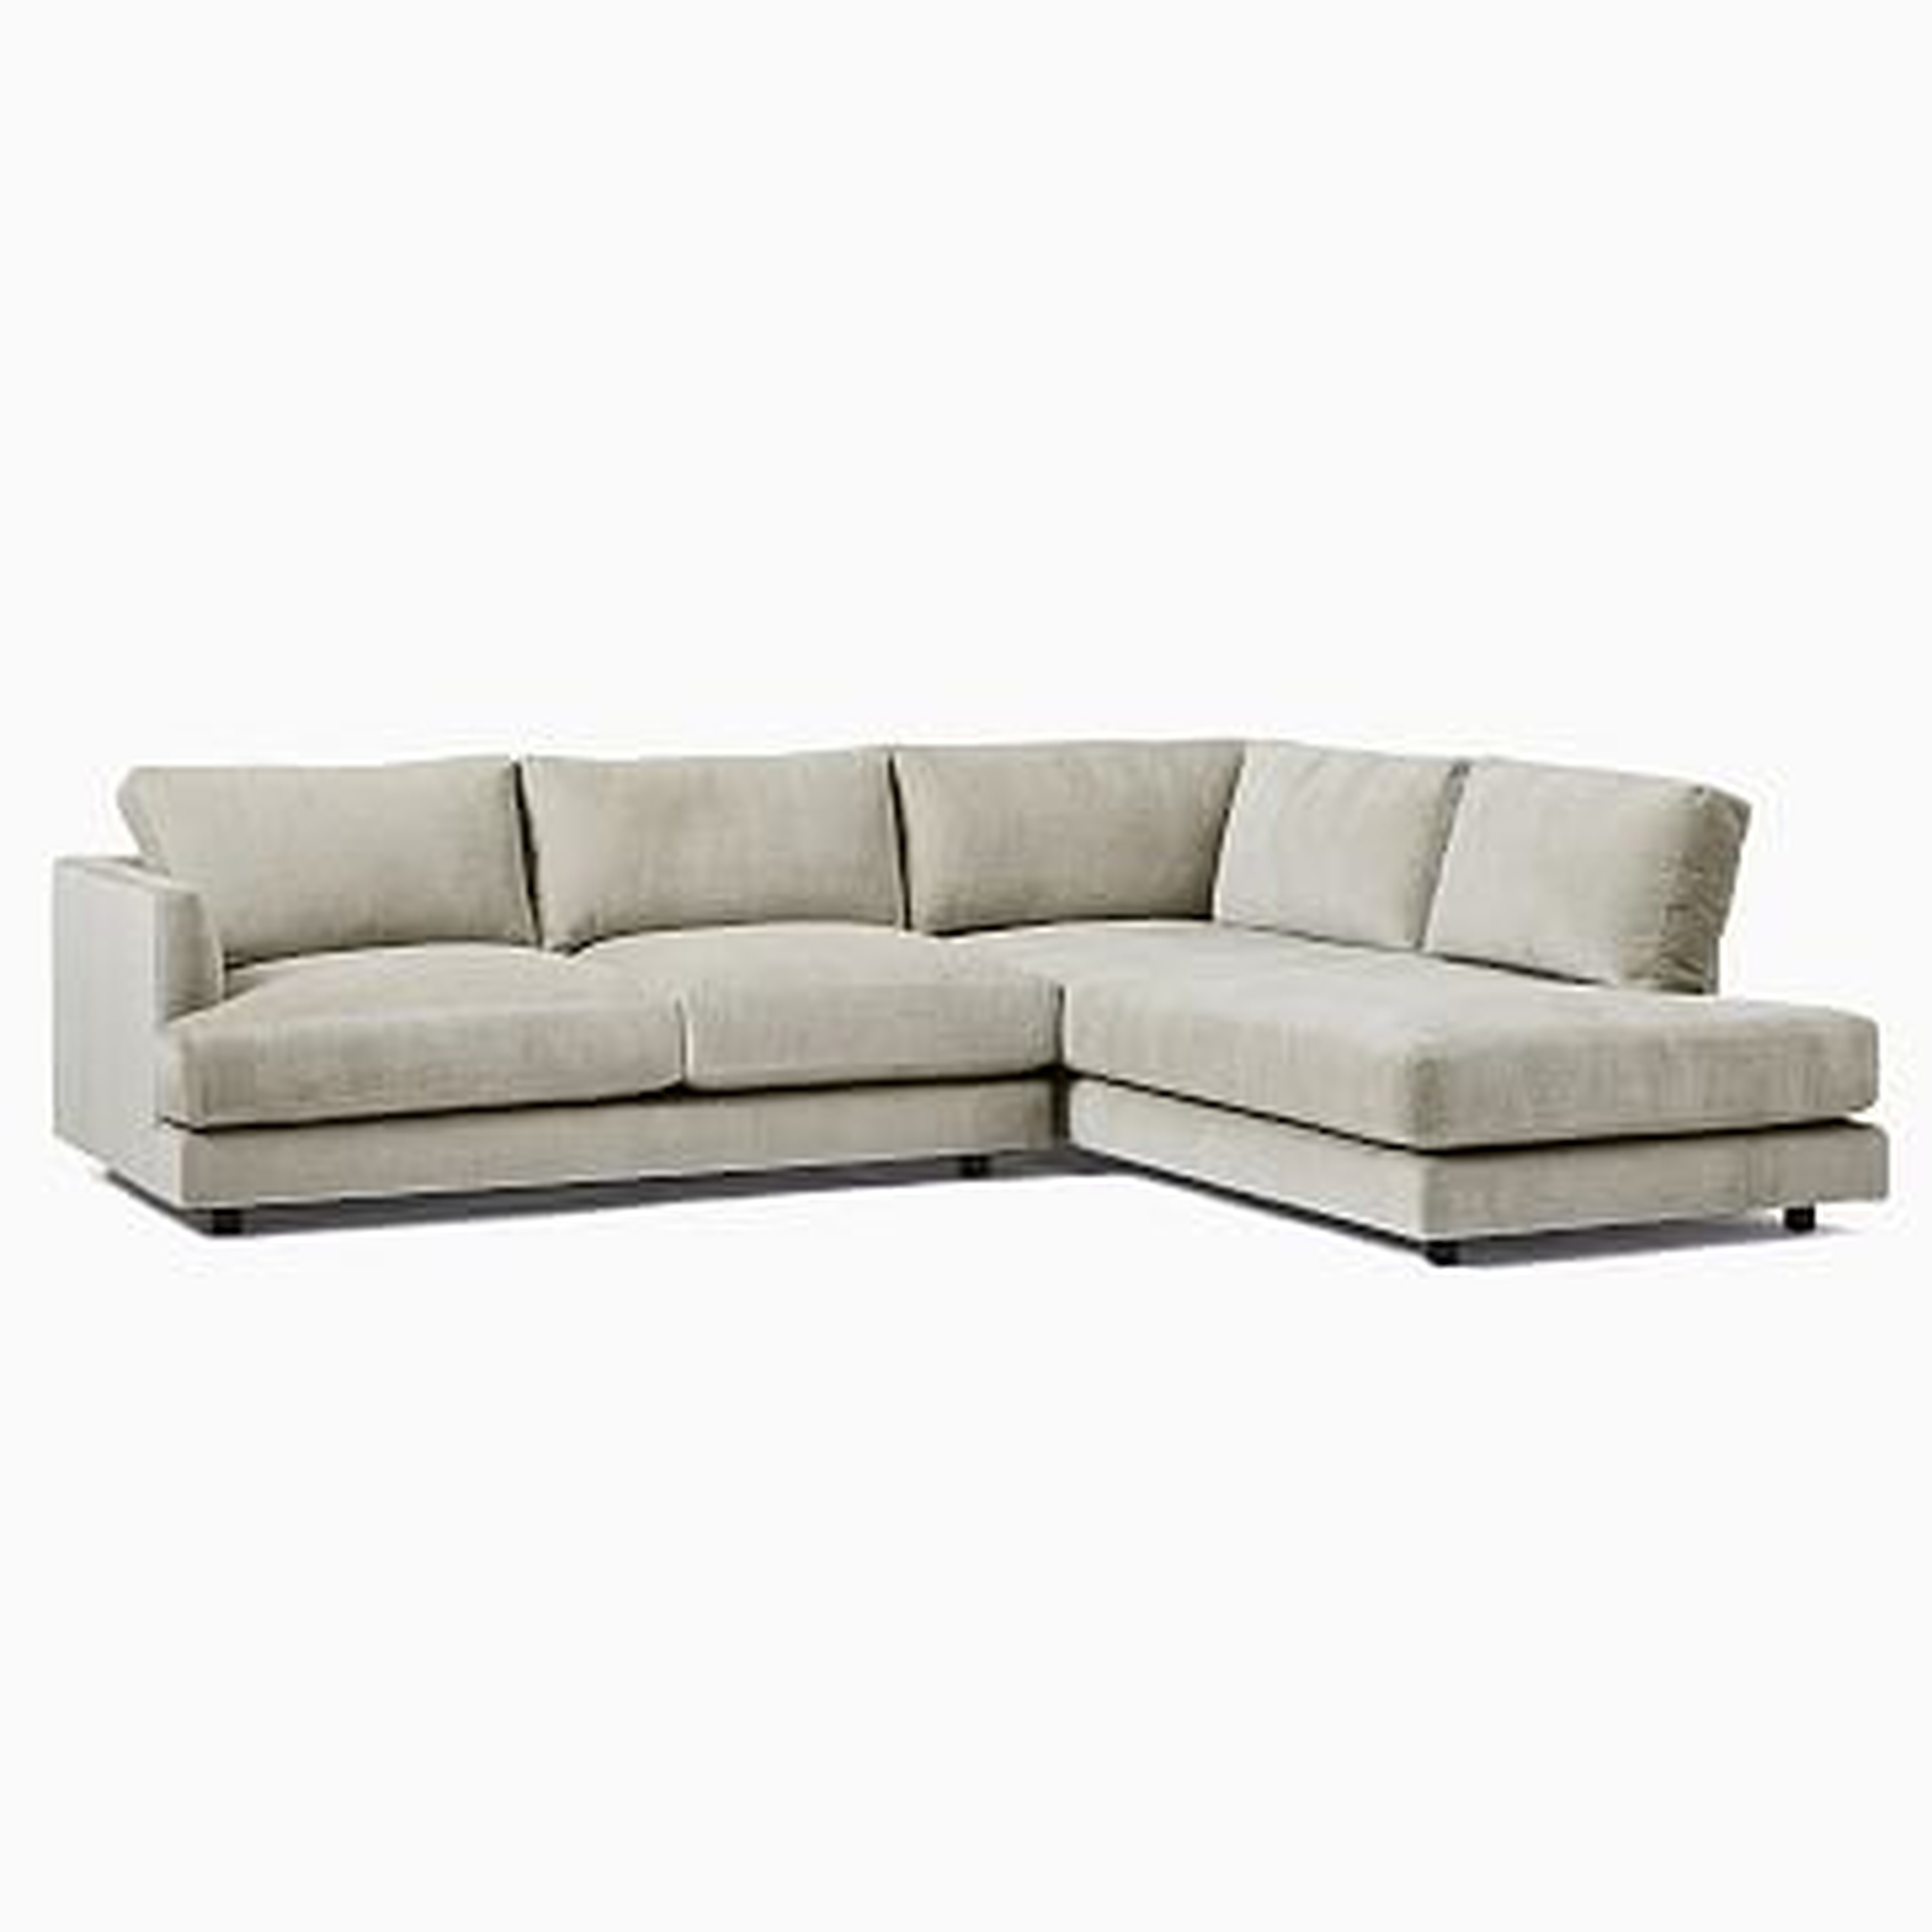 Haven 106" Right Multi Seat 2-Piece Bumper Chaise Sectional, Standard Depth, Distressed Velvet, Dune - West Elm